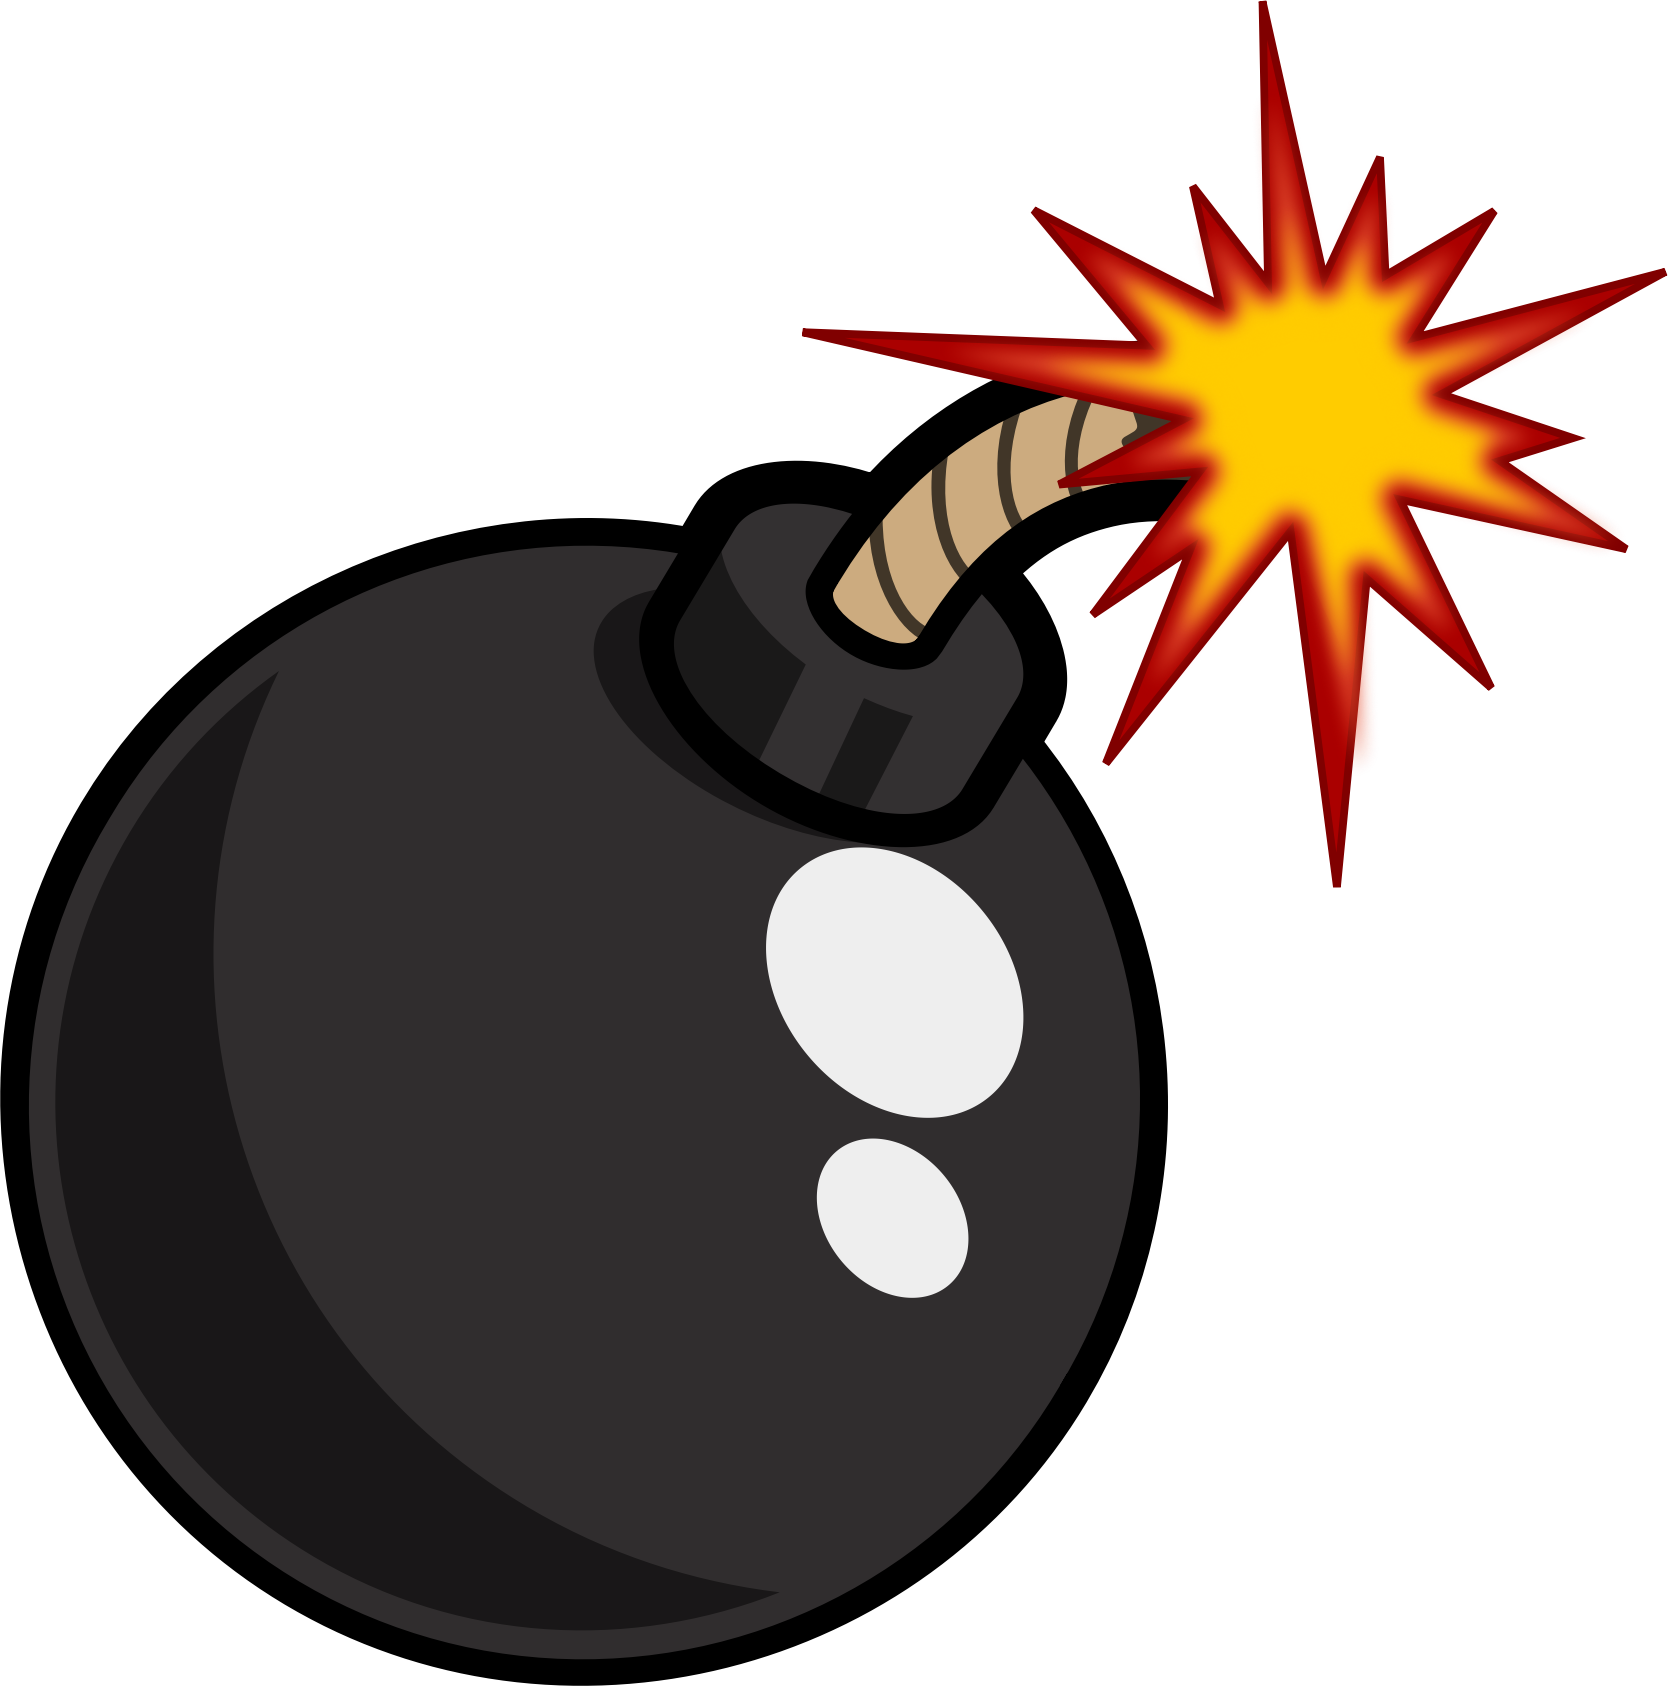 Bomb clipart transparent background. Png images free download